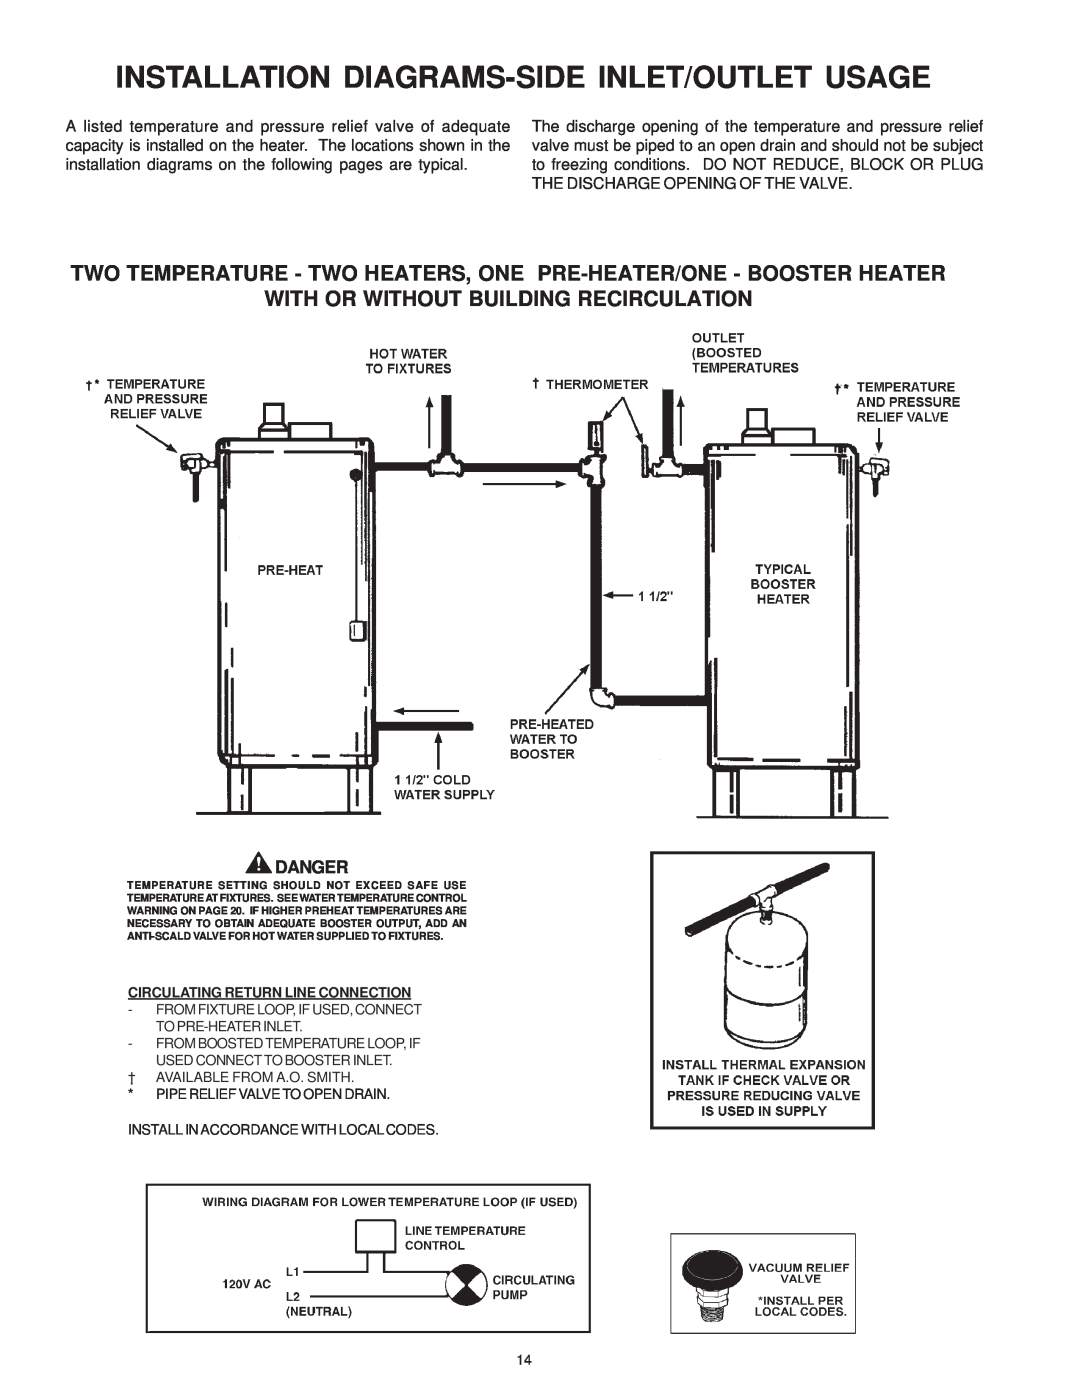 A.O. Smith SBD 30 150 Installation Diagrams-Side Inlet/Outlet Usage, With Or Without Building Recirculation, Danger 